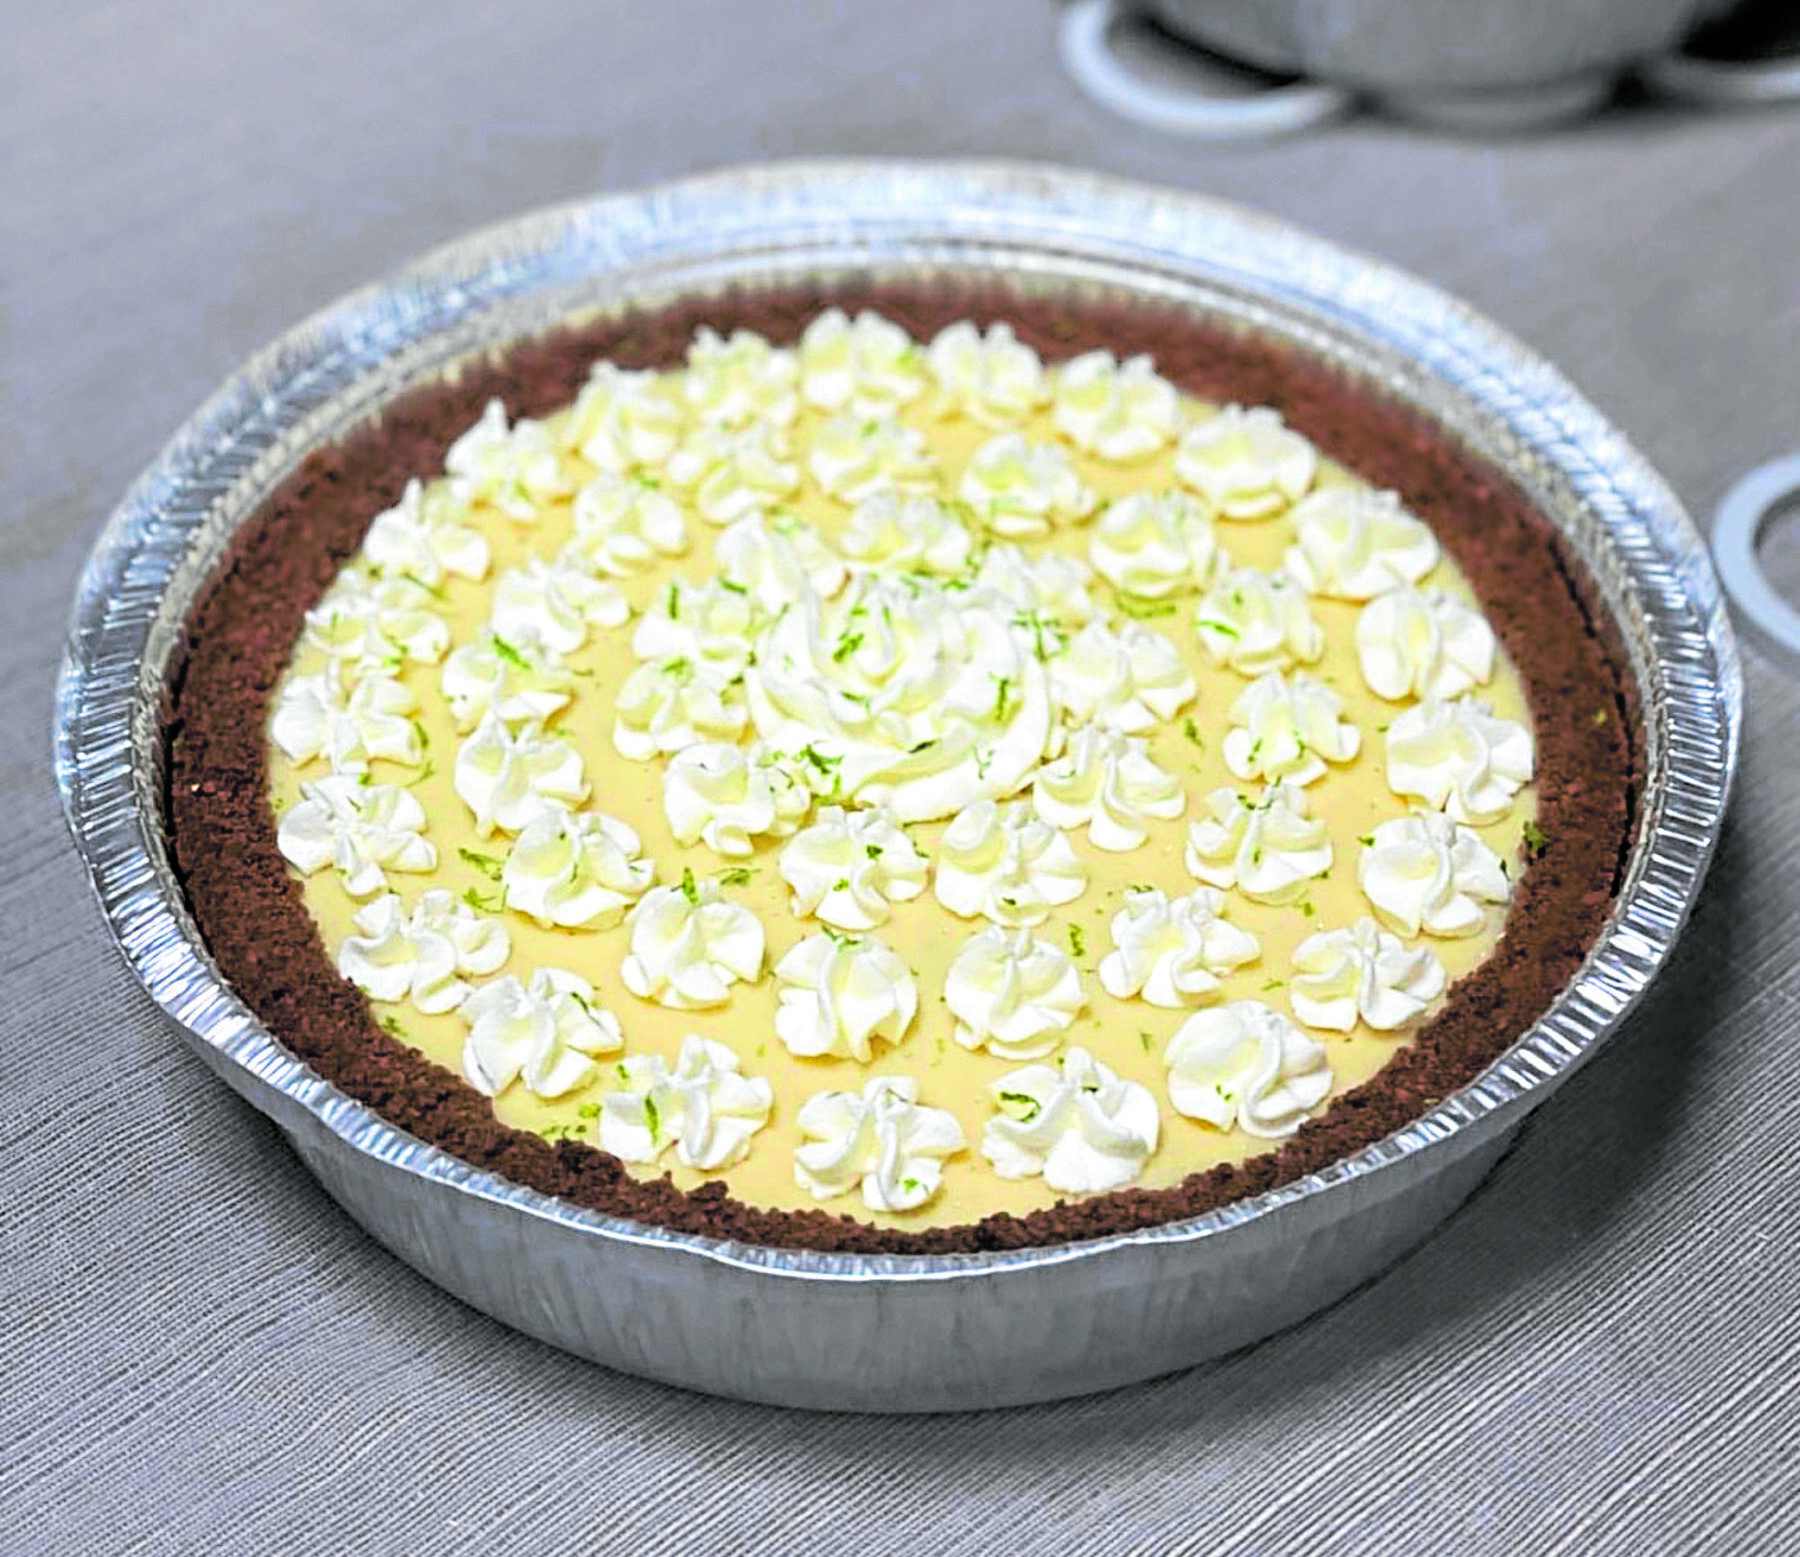 Why this key lime pie is truly special